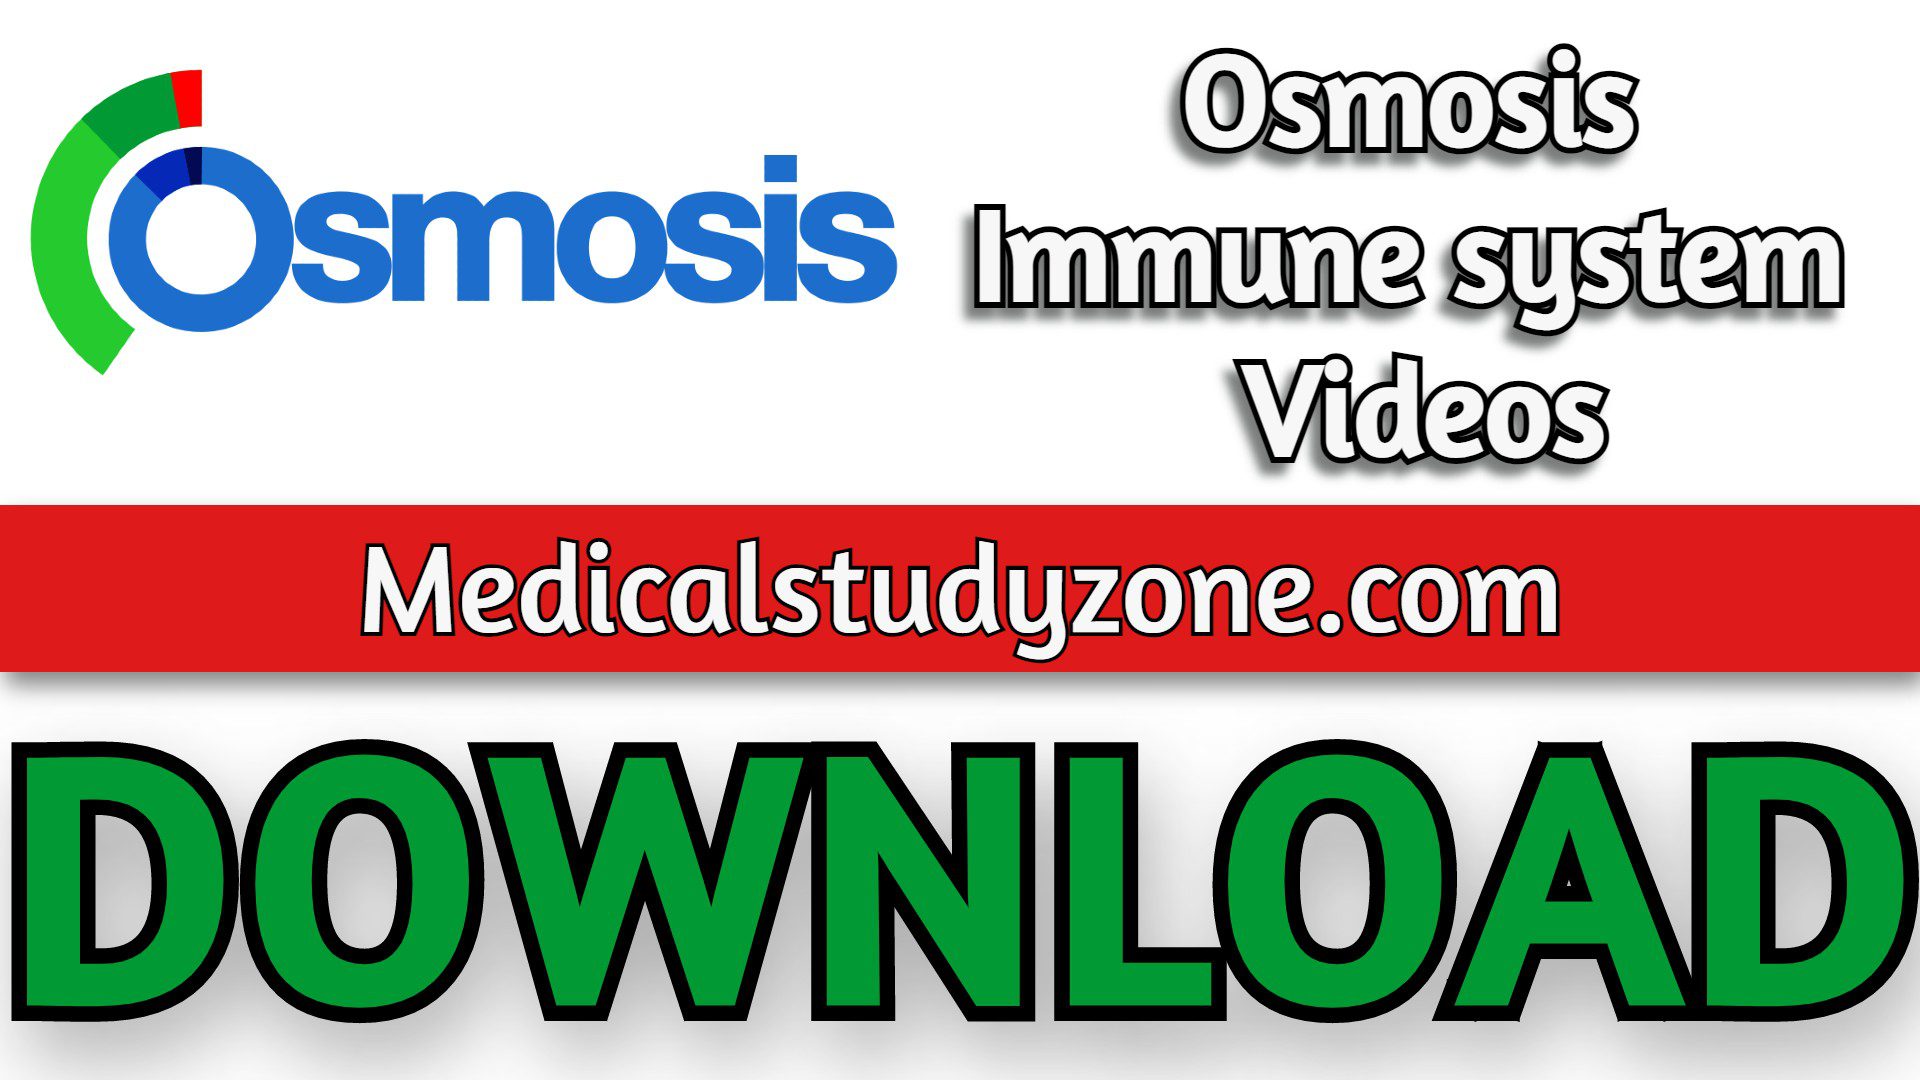 Osmosis Immune system Videos 2021 Free Download